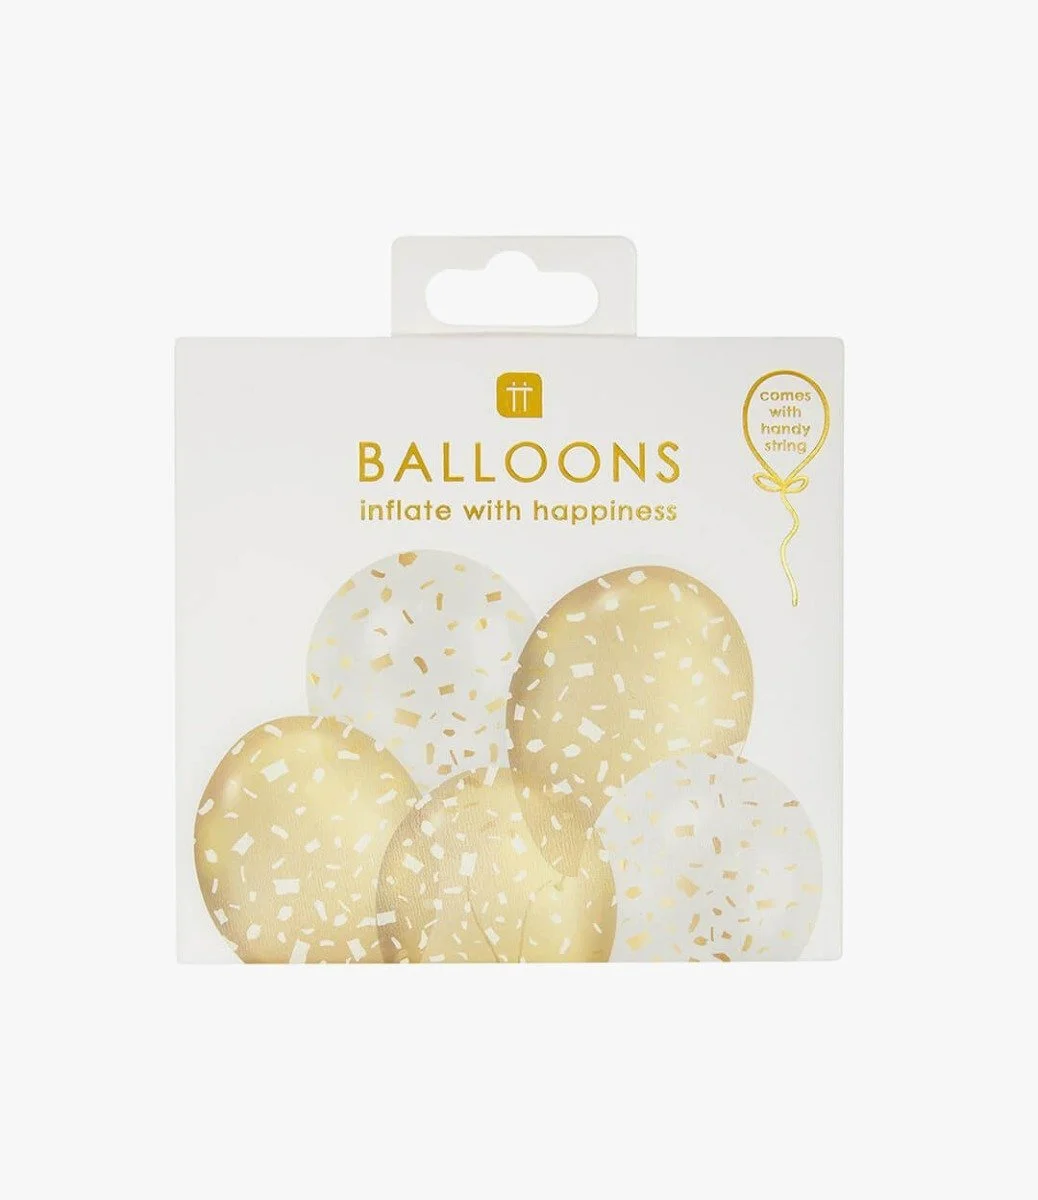 White & Gold Latex Balloons with Confetti Design 5pc Pack by Talking Tables